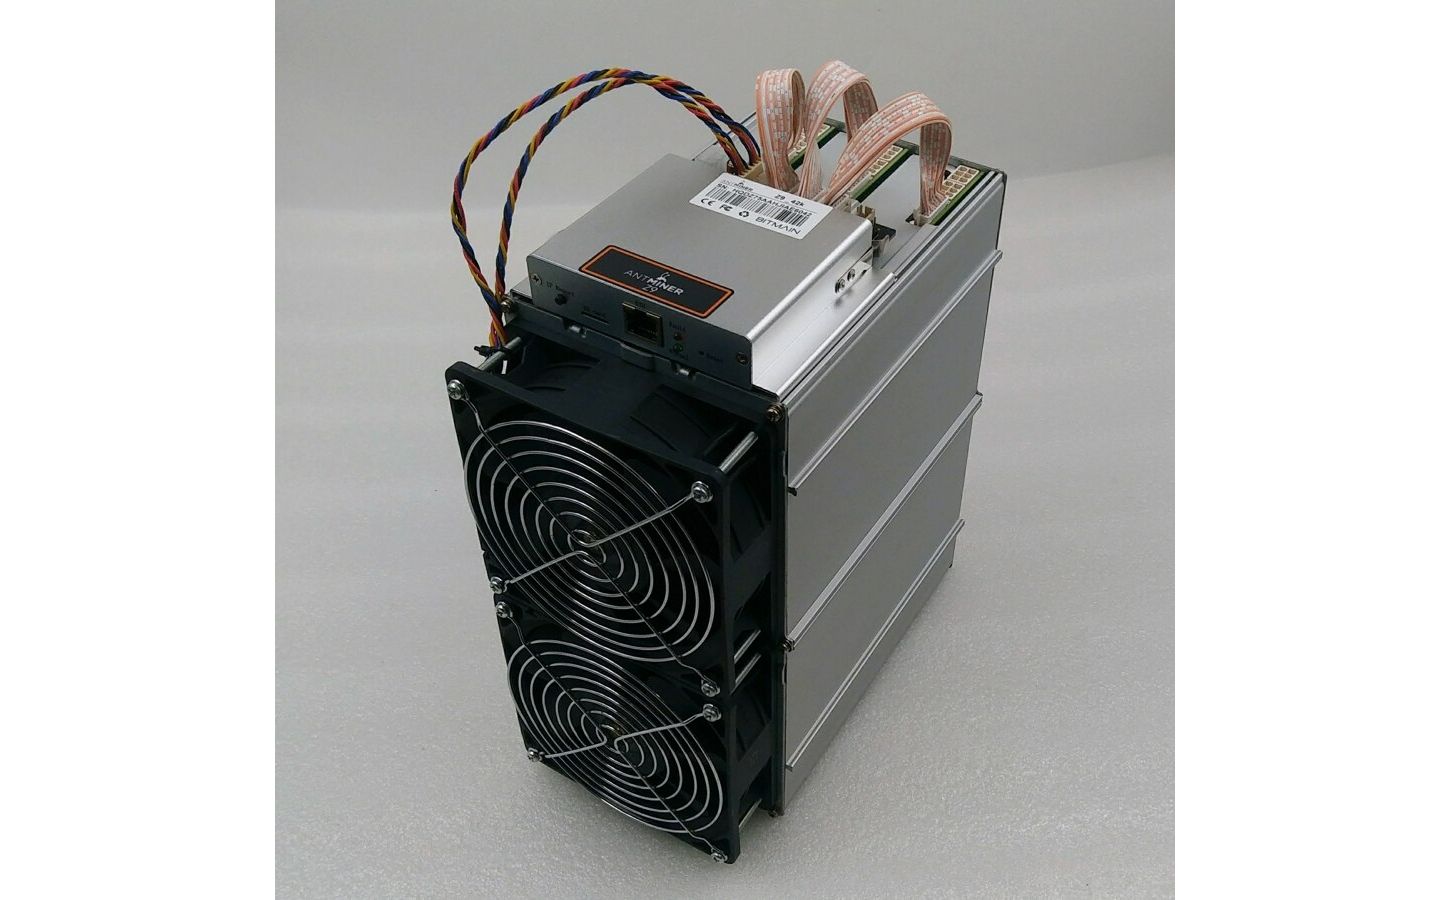 ASIC miners comparison by profitability